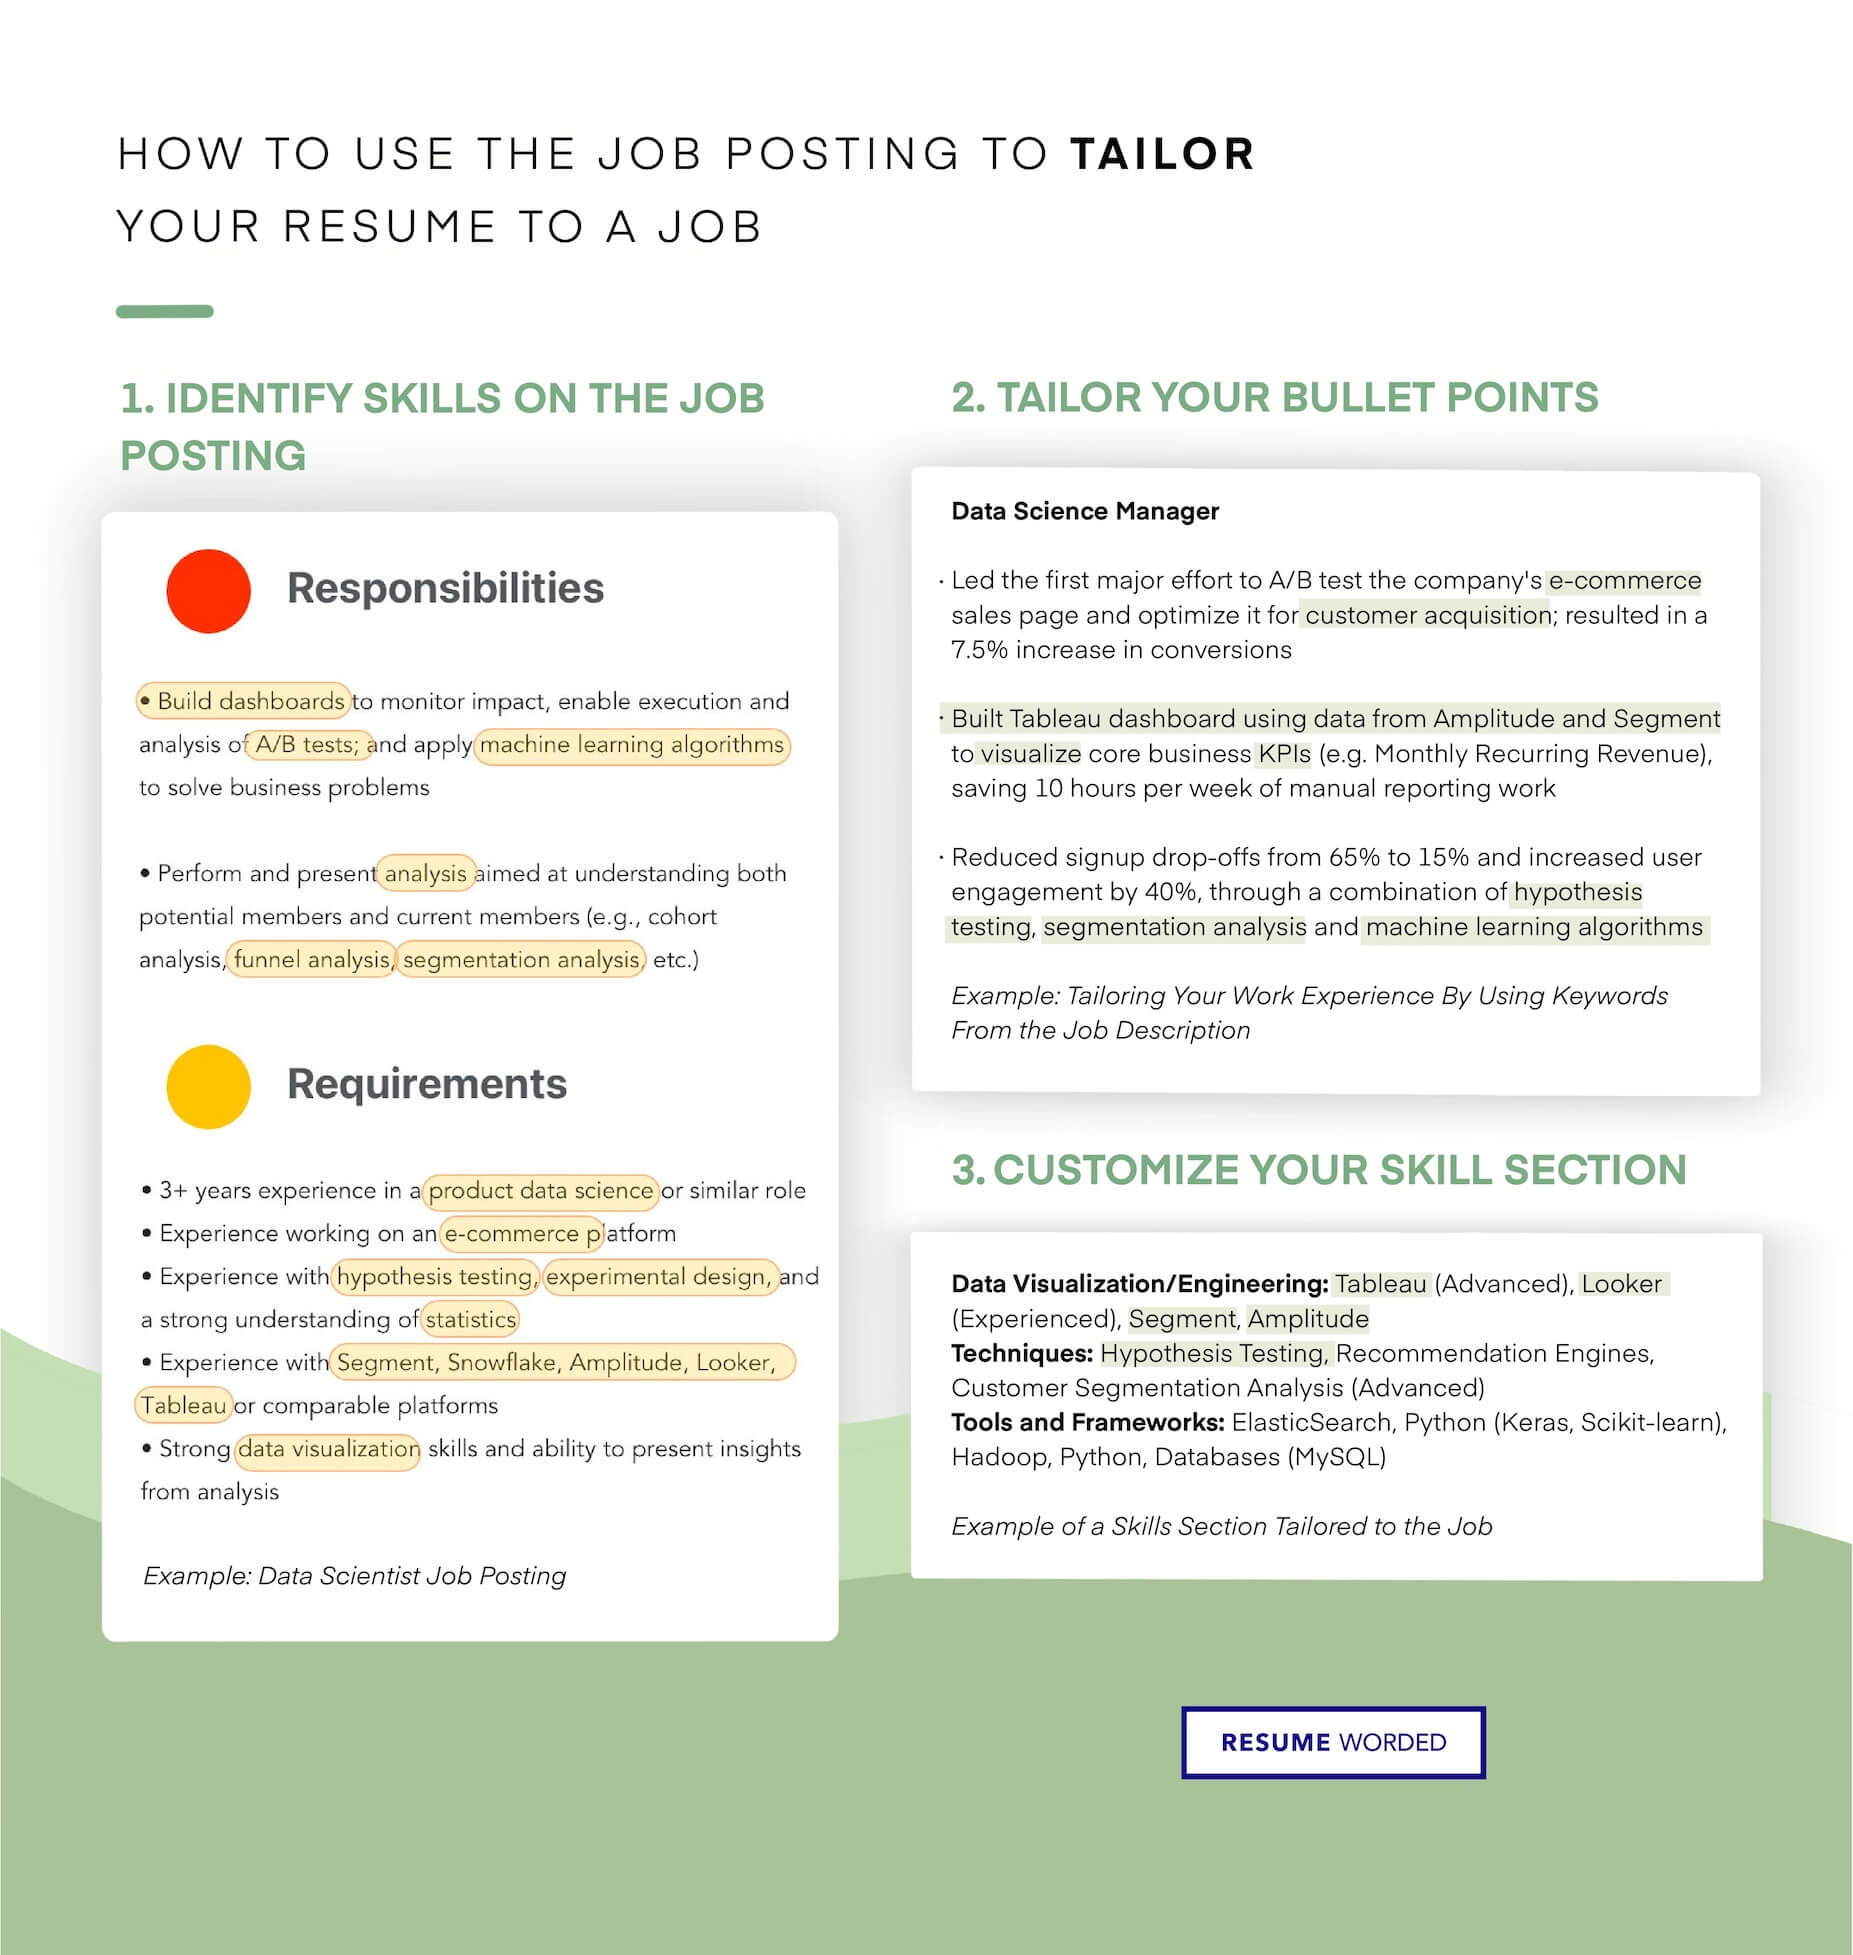 Customize your skills section - Communications Specialist Resume